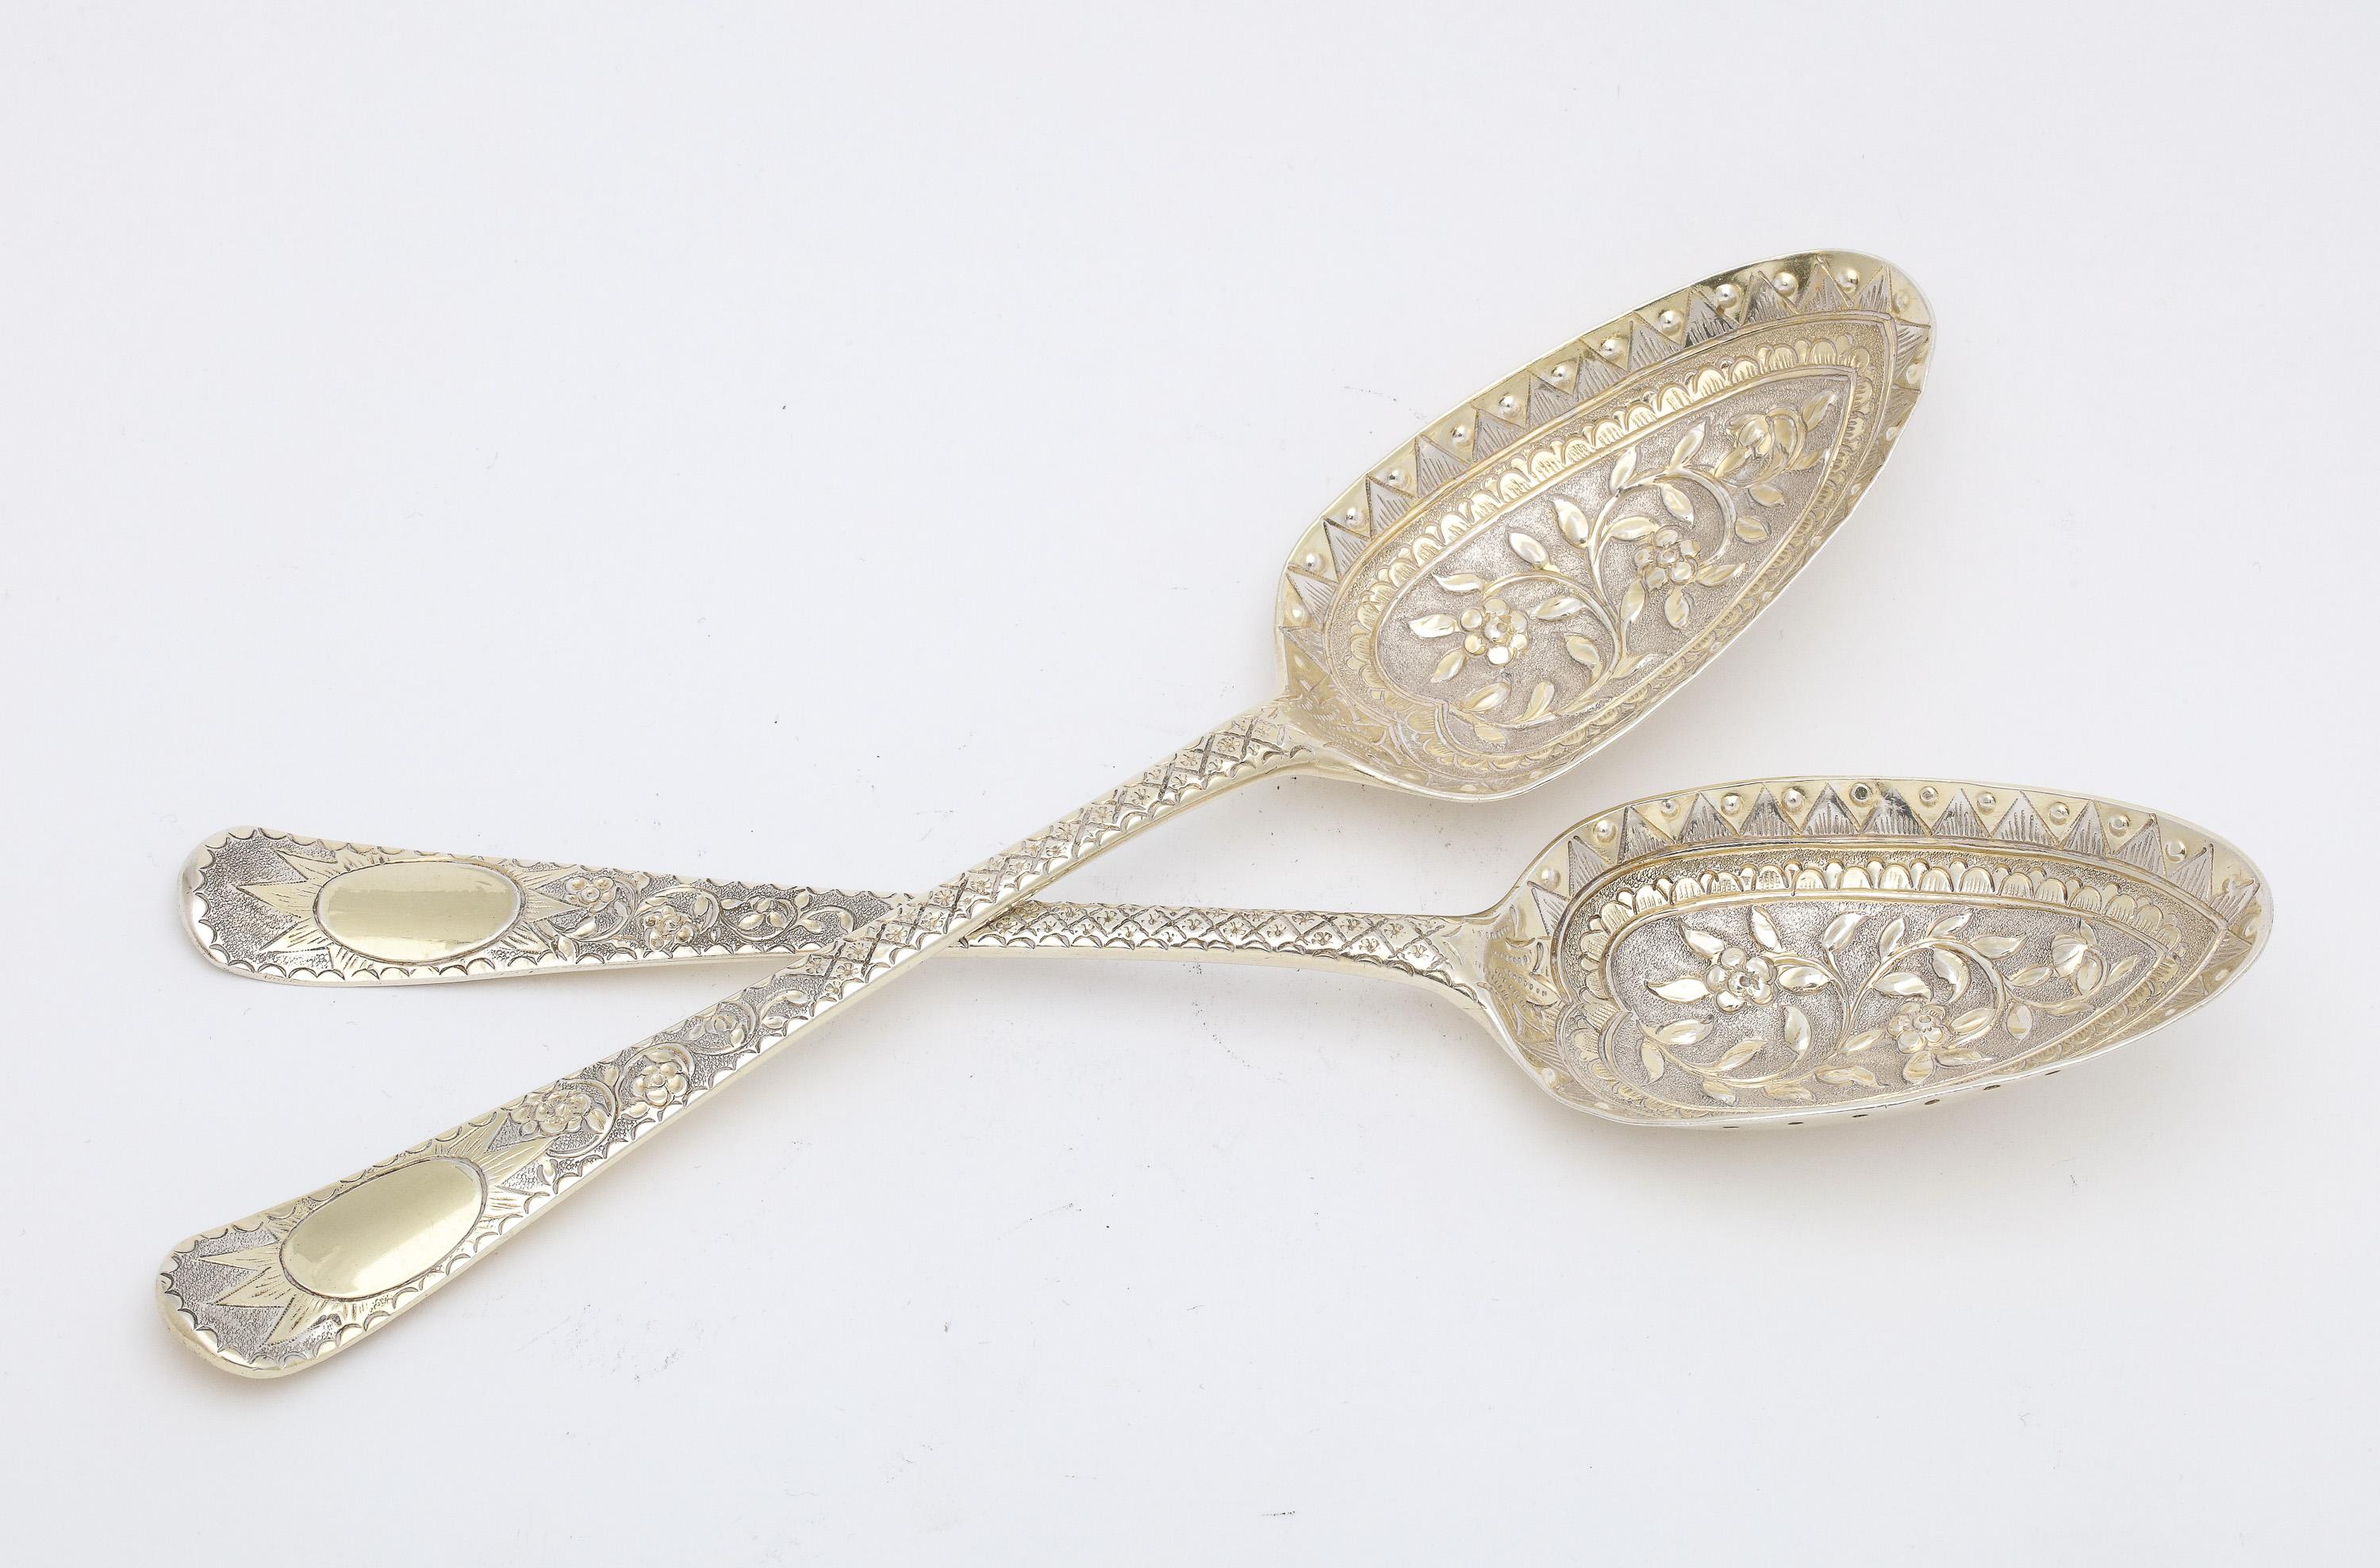 Pair of George III Period Sterling Silver-Gilt Serving Spoons For Sale 6